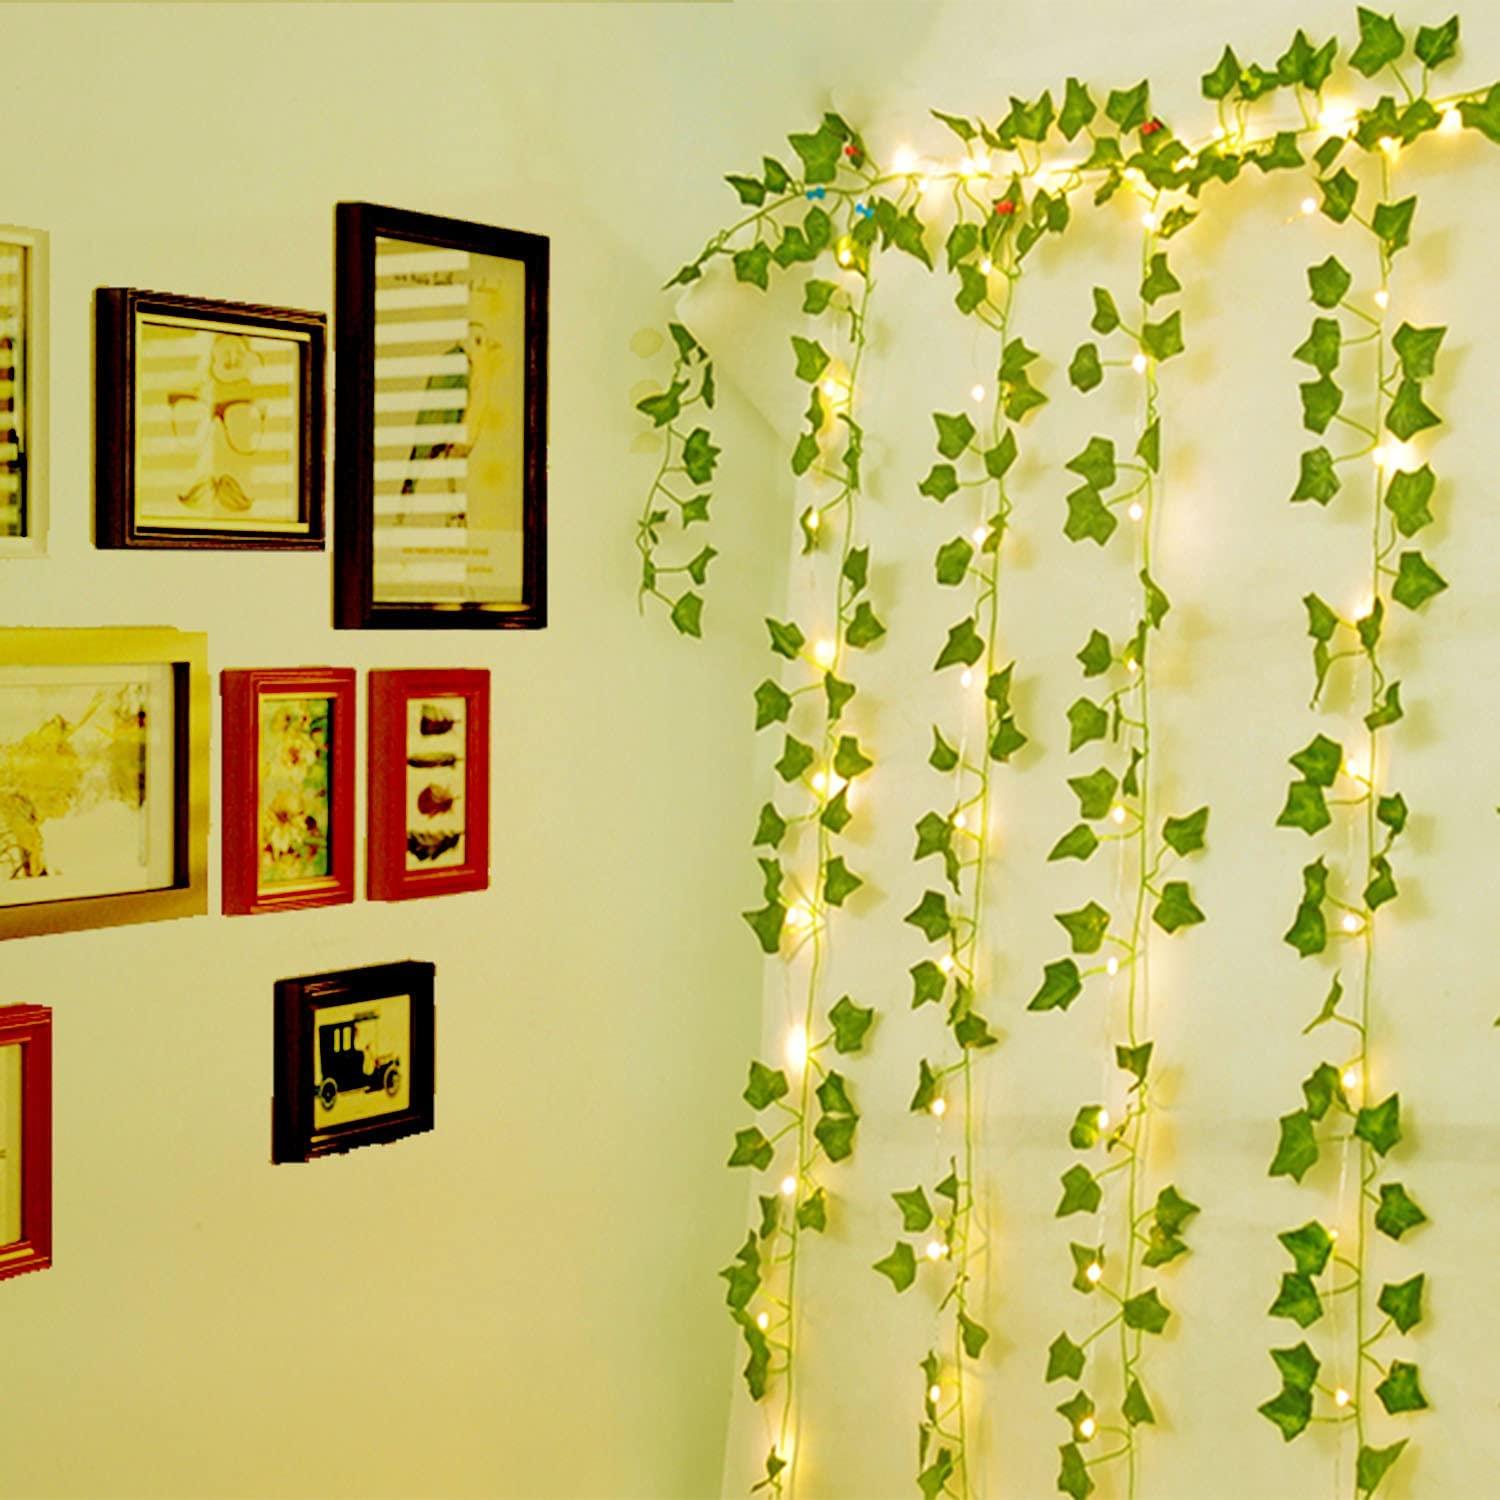 12 Pcs Artificial Ivy Garland Fake Vines with 9.8*9.8Ft Lights String (300 LED) Decor Faux Green Hanging Plant Greenery for Wall Party Wedding Room - Lasercutwraps Shop